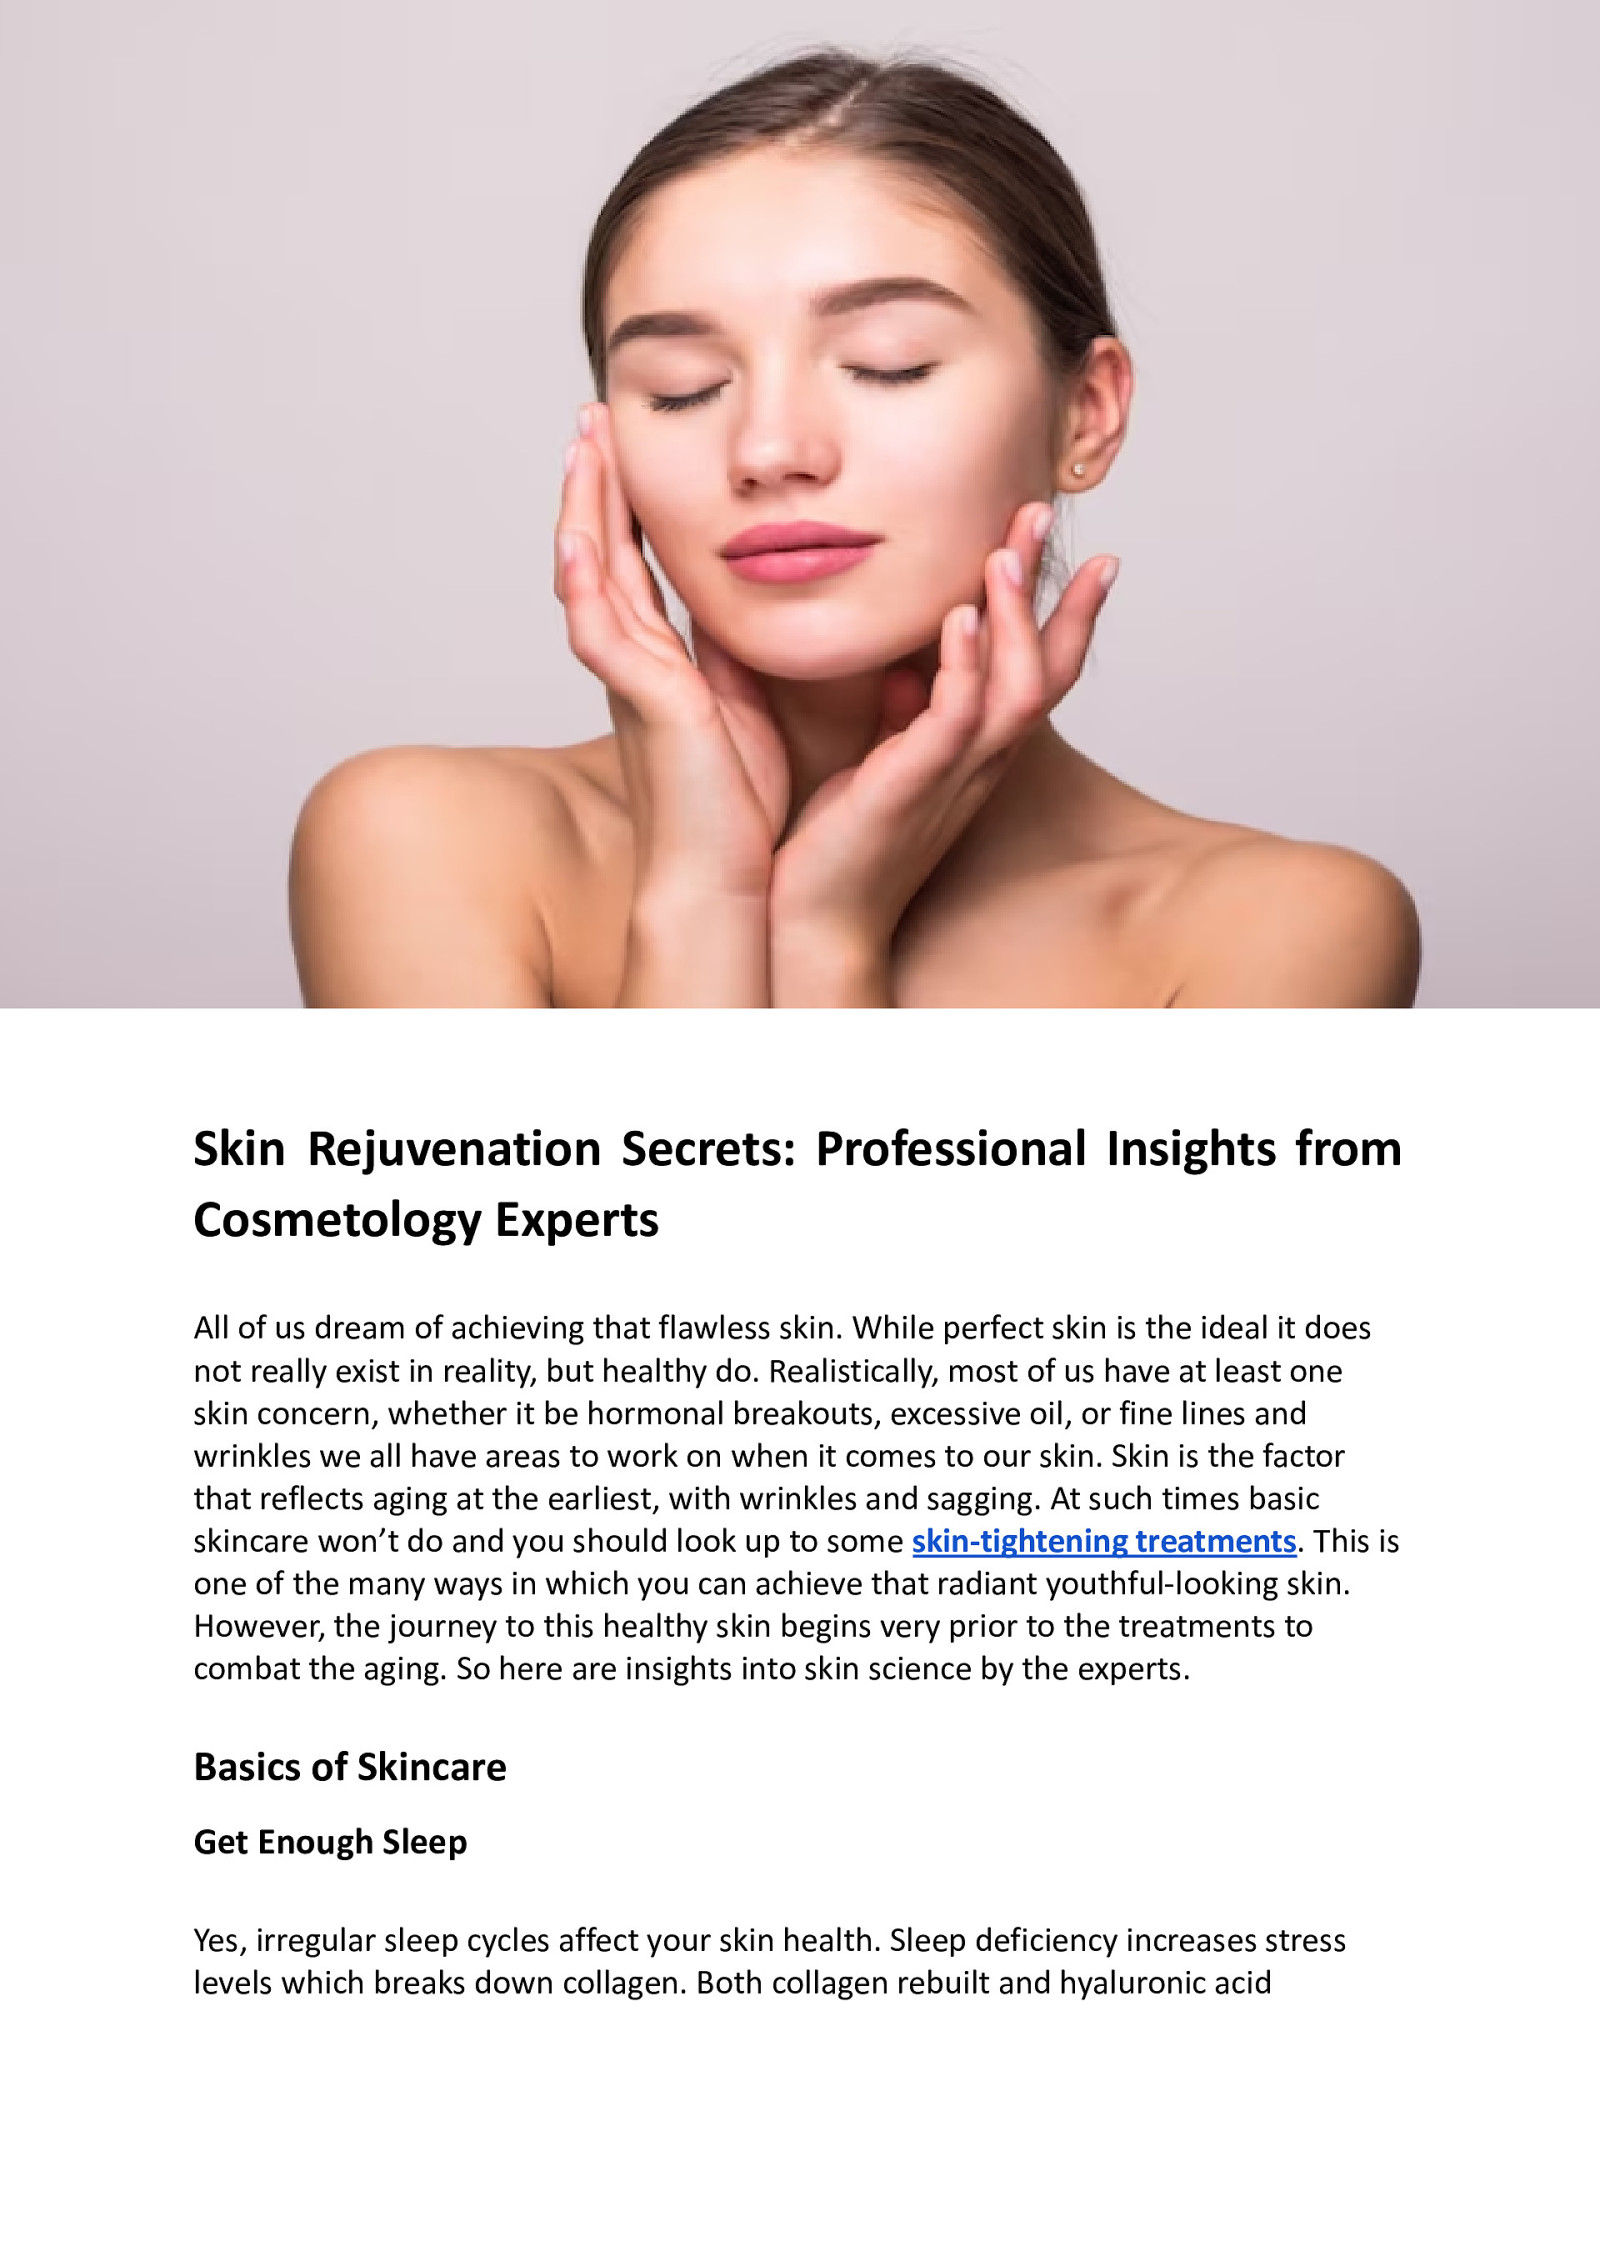 Skin Rejuvenation Secrets: Professional Insights from Cosmetology Experts